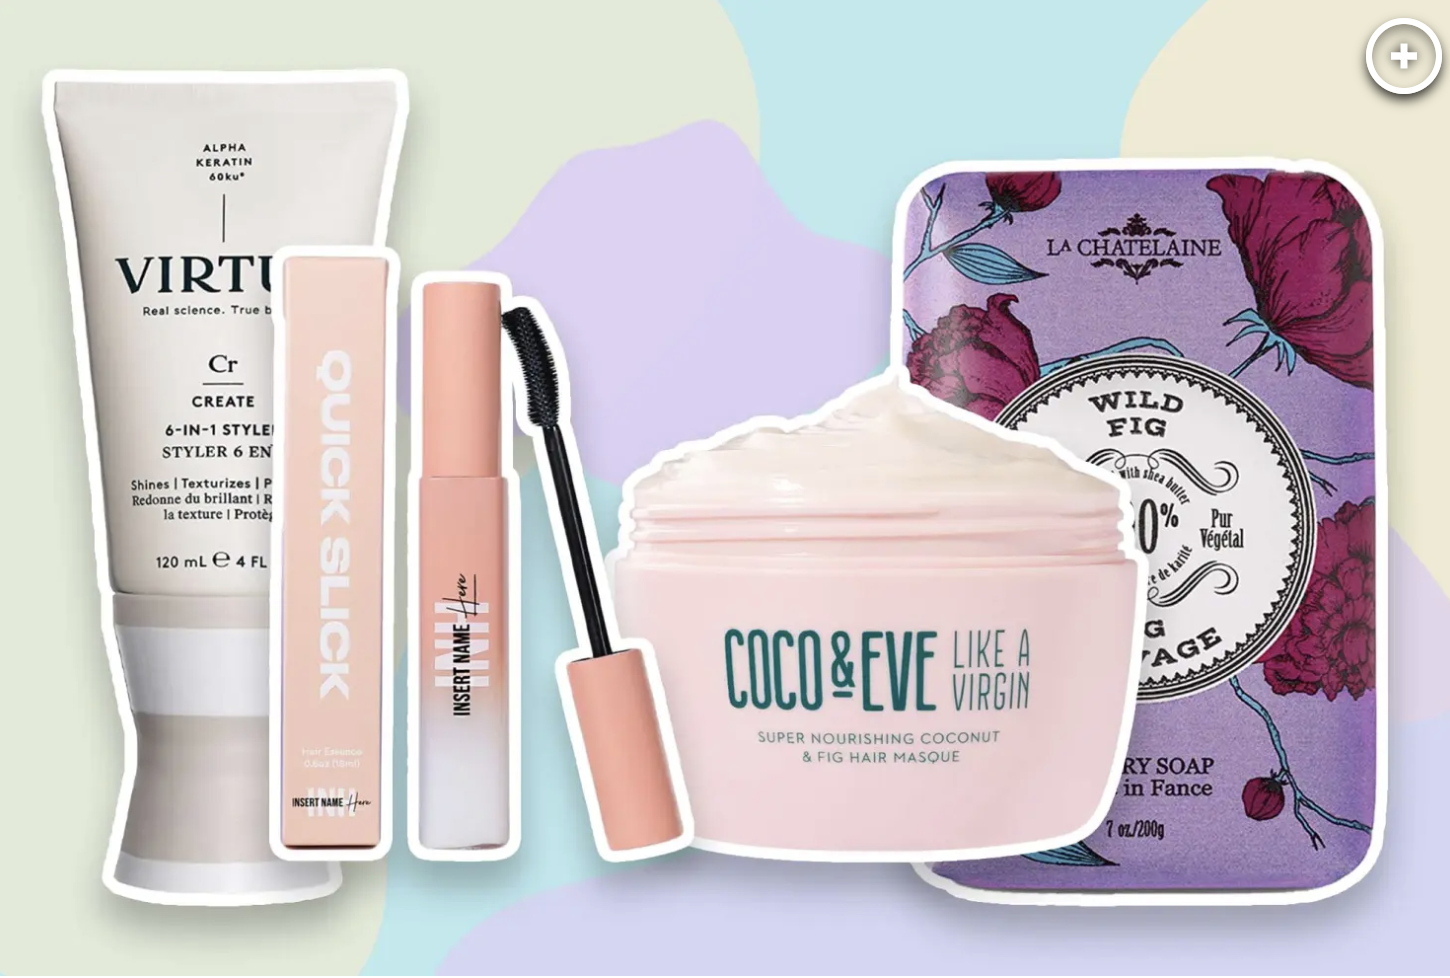 New York Post | These are the 12 best Amazon indie beauty brands to shop now